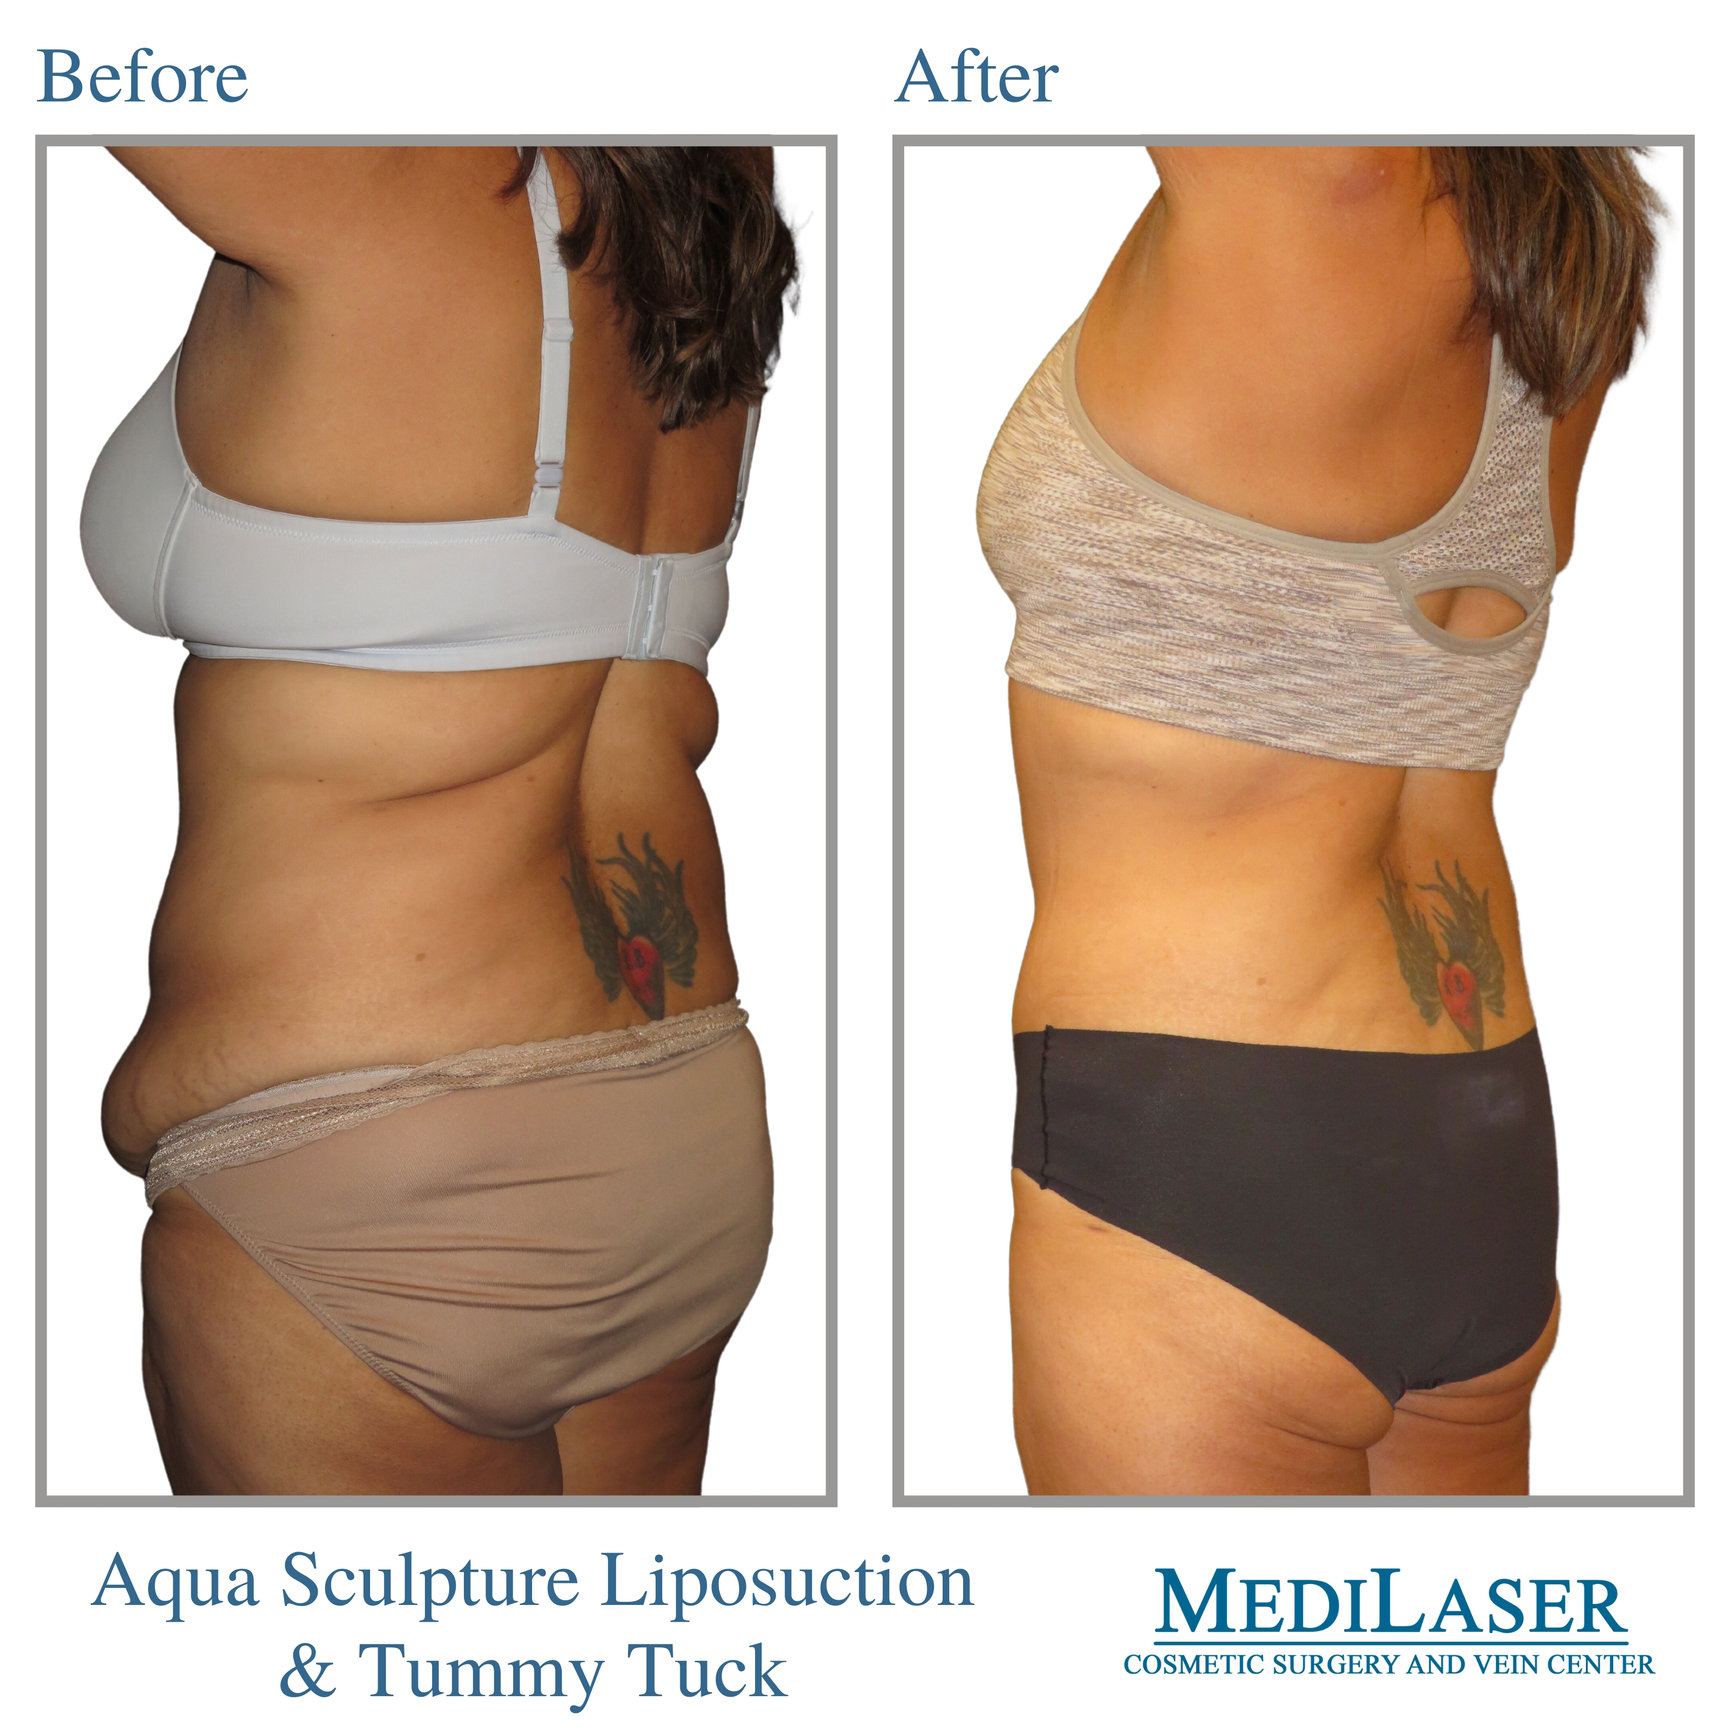 Tummy Tuck Liposuction Before and After - Medilaser Surgery and Vein Center